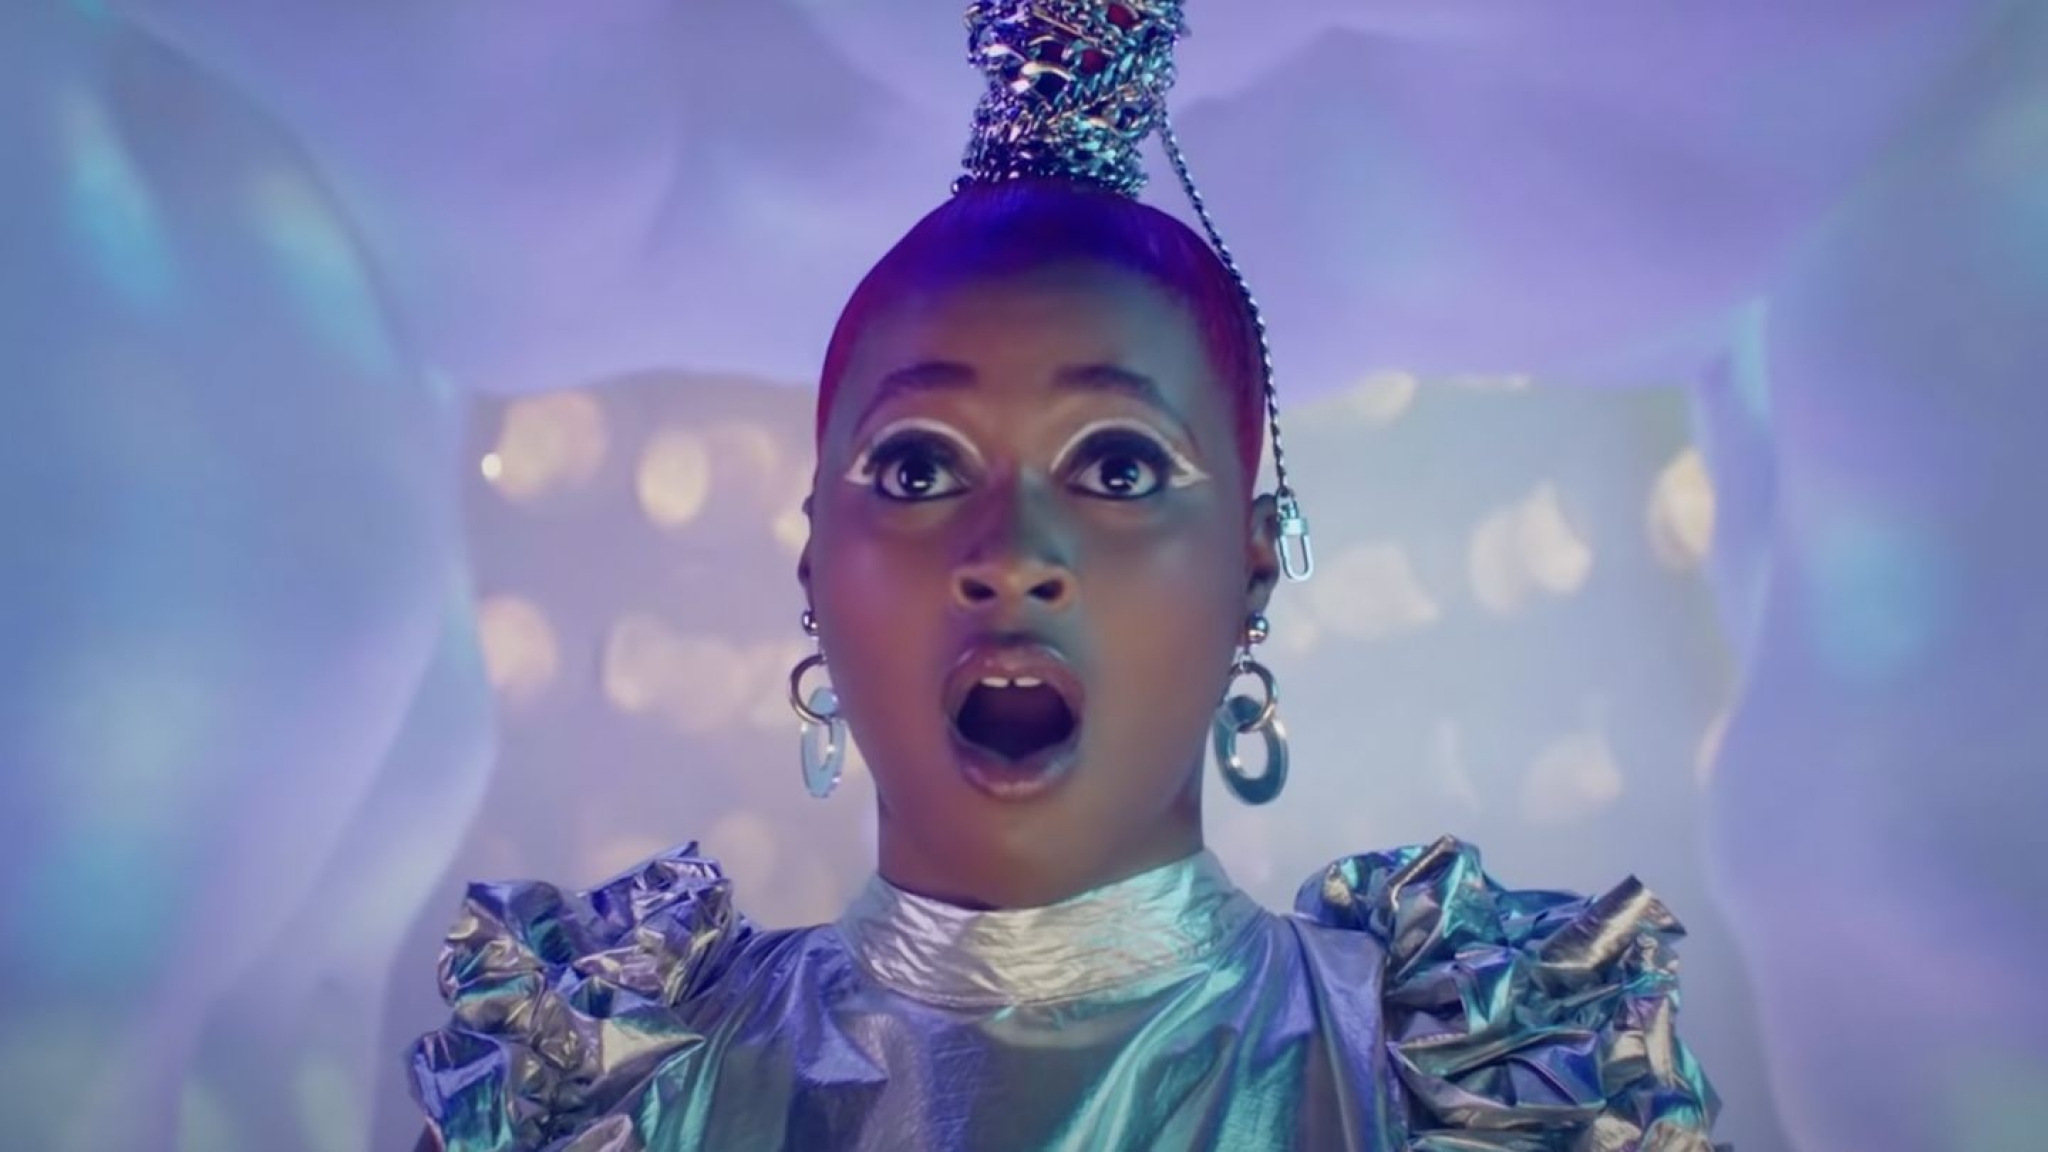 Tierra Whack Climbs Aboard A Lego Spaceship In Dreamy ‘Link’ Music Video